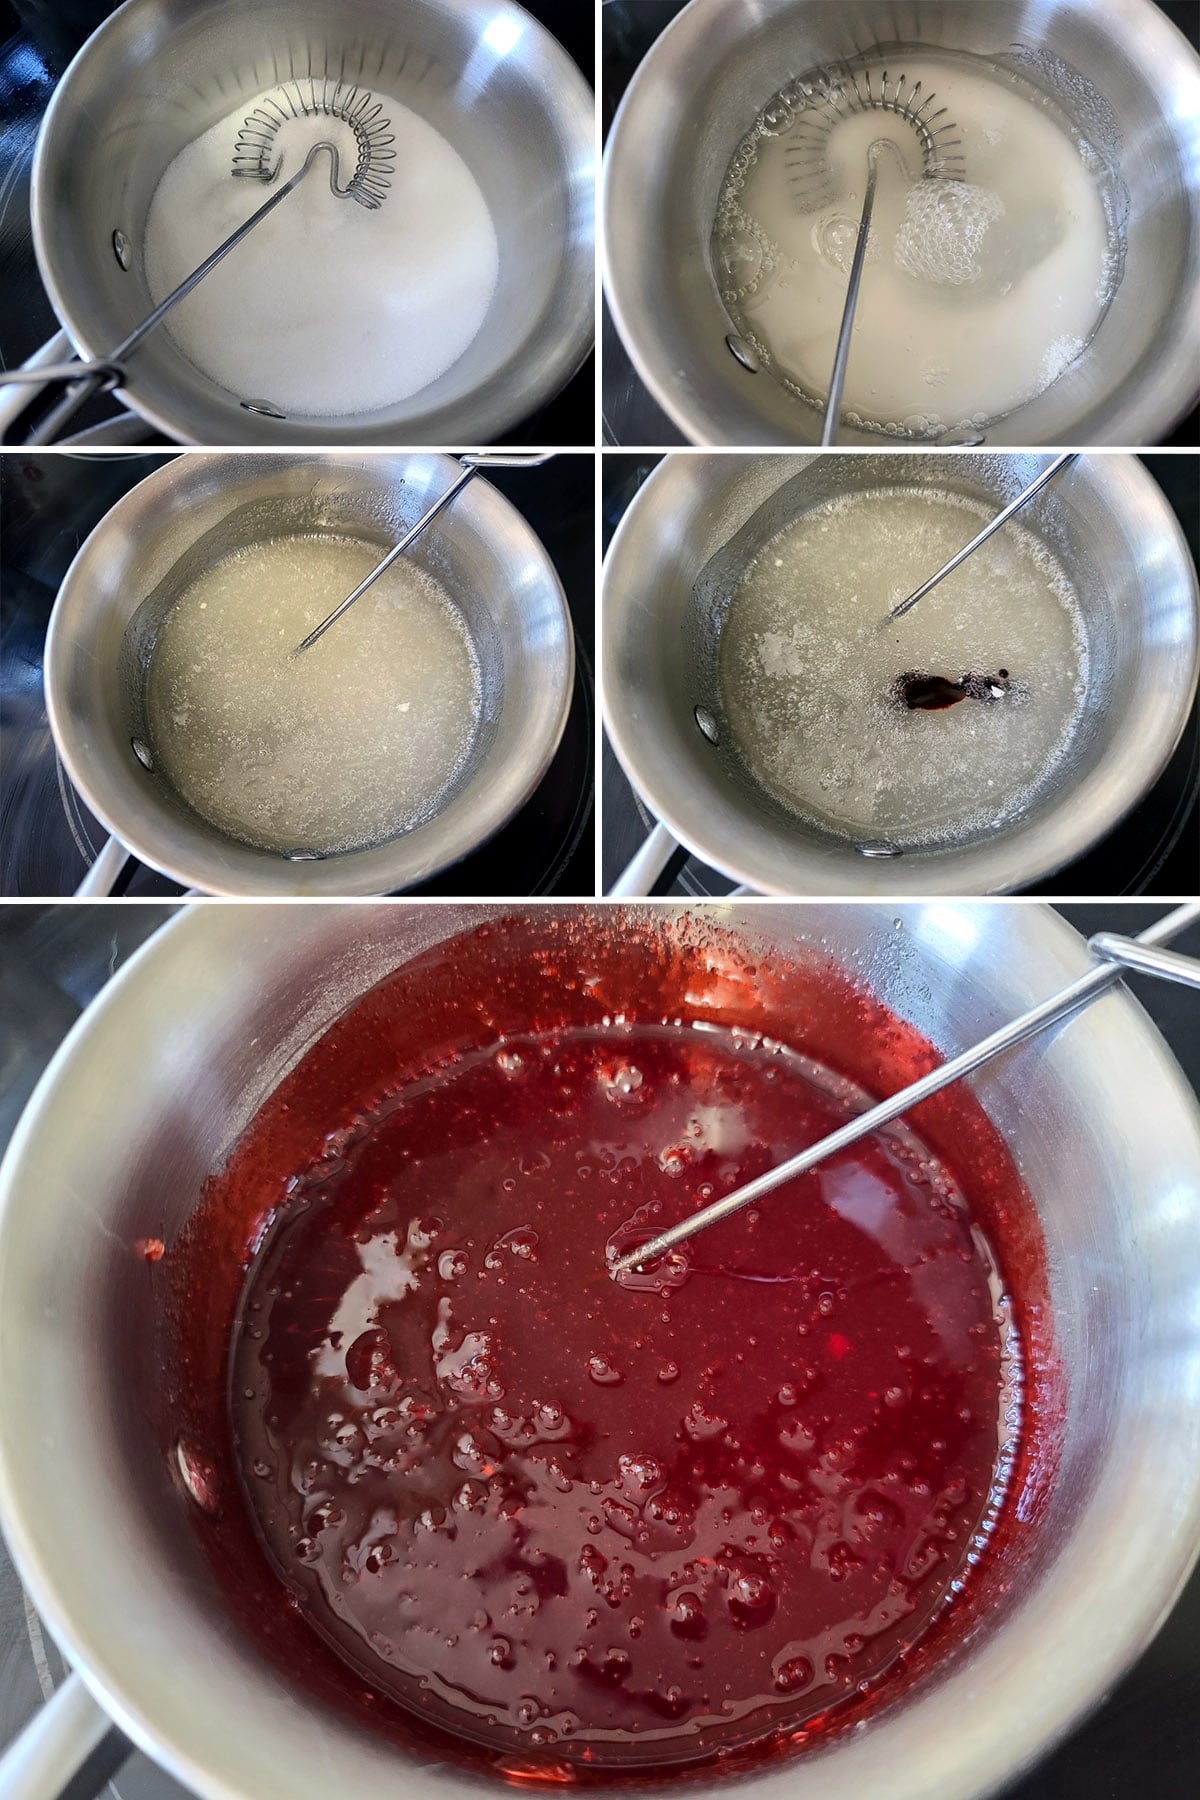 A 5 part image showing the lychee pancake syrup being made and dyed red.